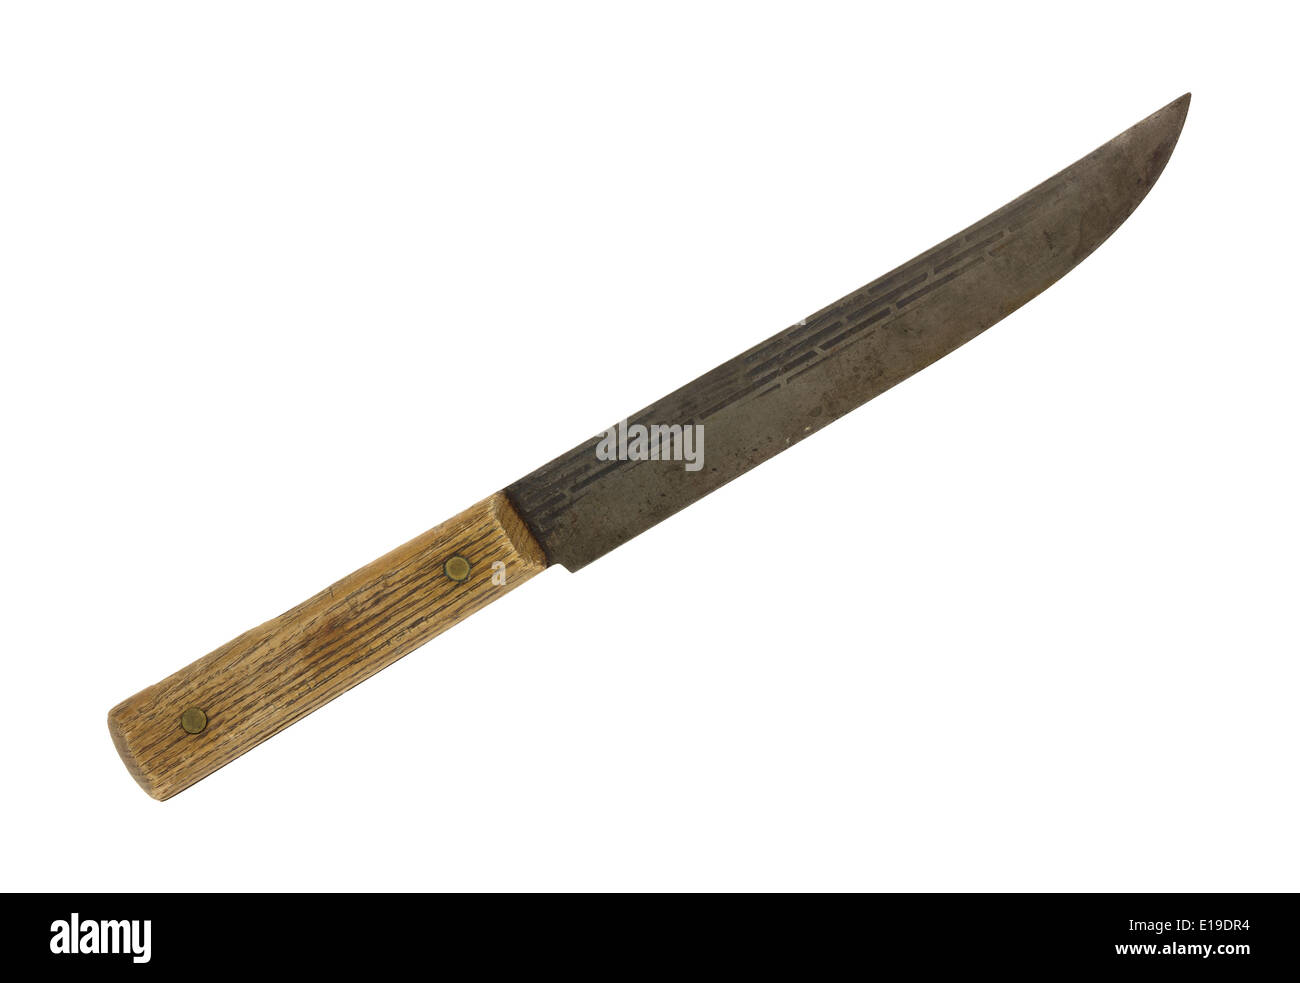 https://c8.alamy.com/comp/E19DR4/an-old-wood-handled-meat-knife-with-a-worn-blade-isolated-on-a-white-E19DR4.jpg